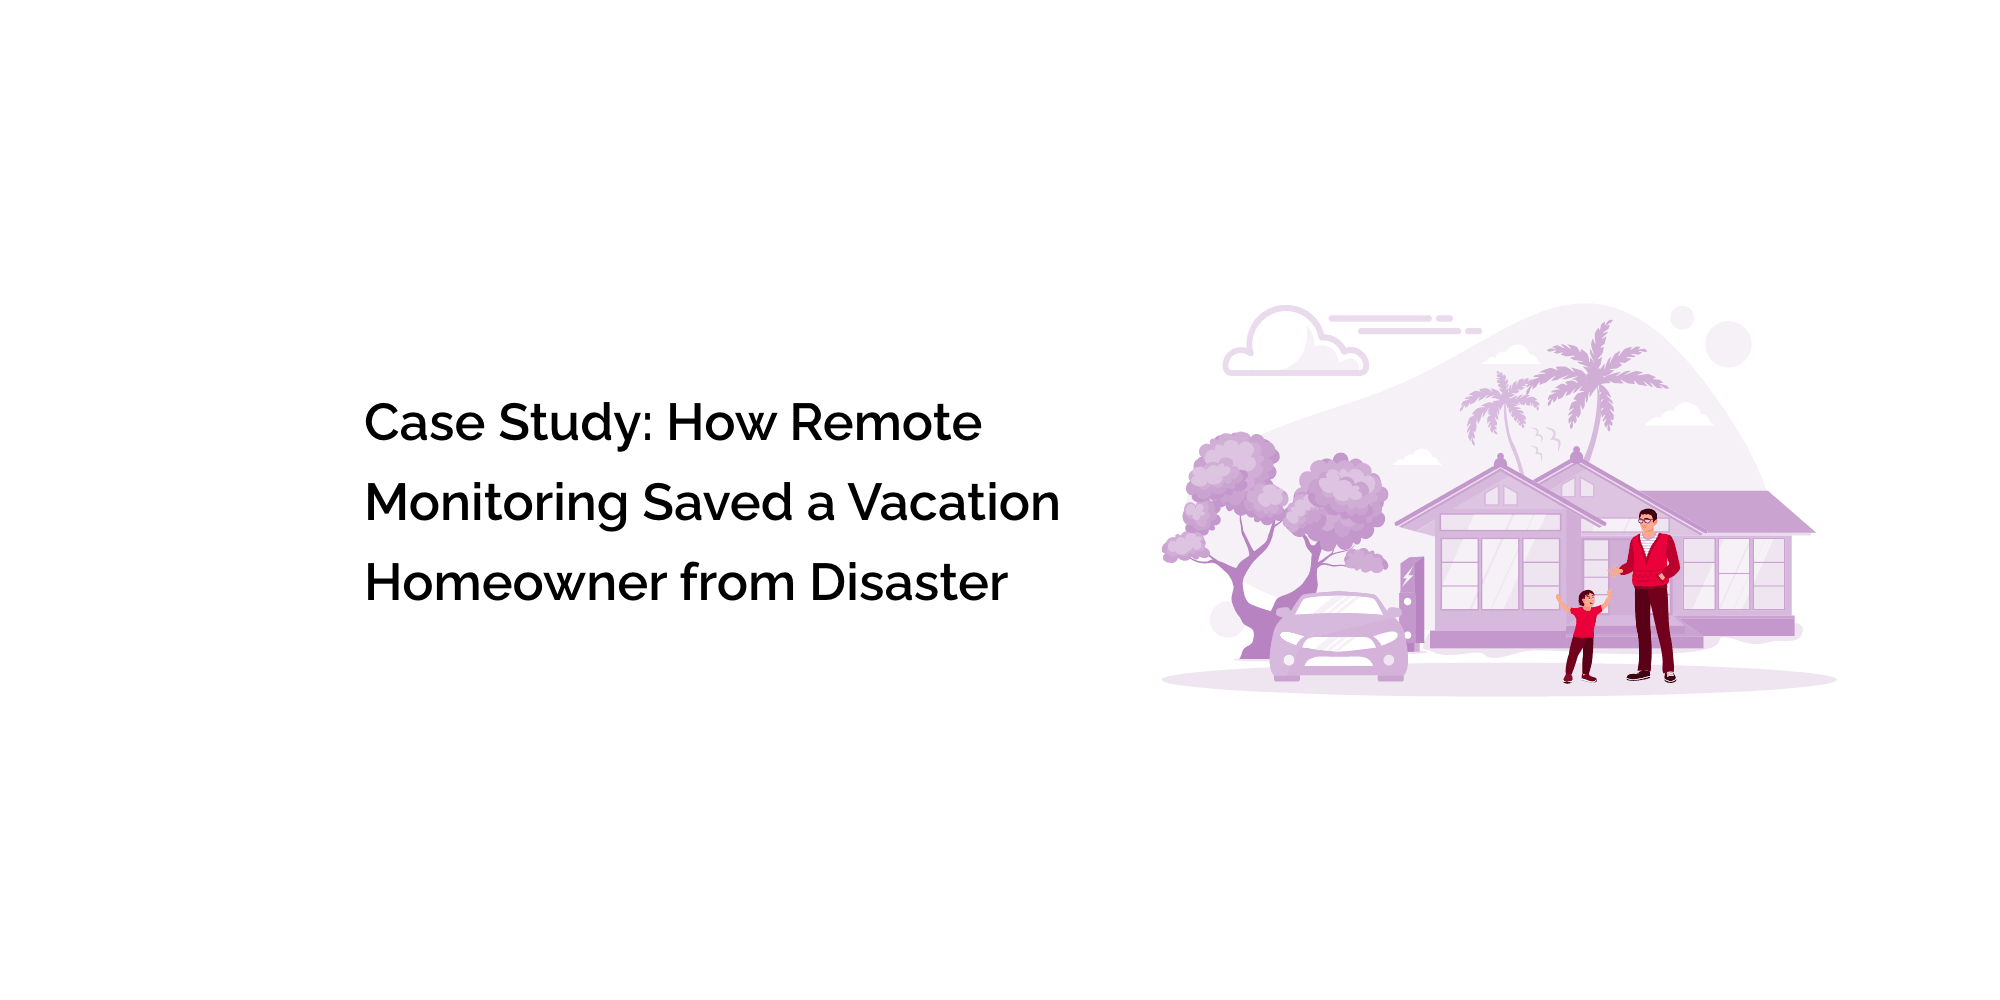 Case Study: How Remote Monitoring Saved a Vacation Homeowner from Disaster